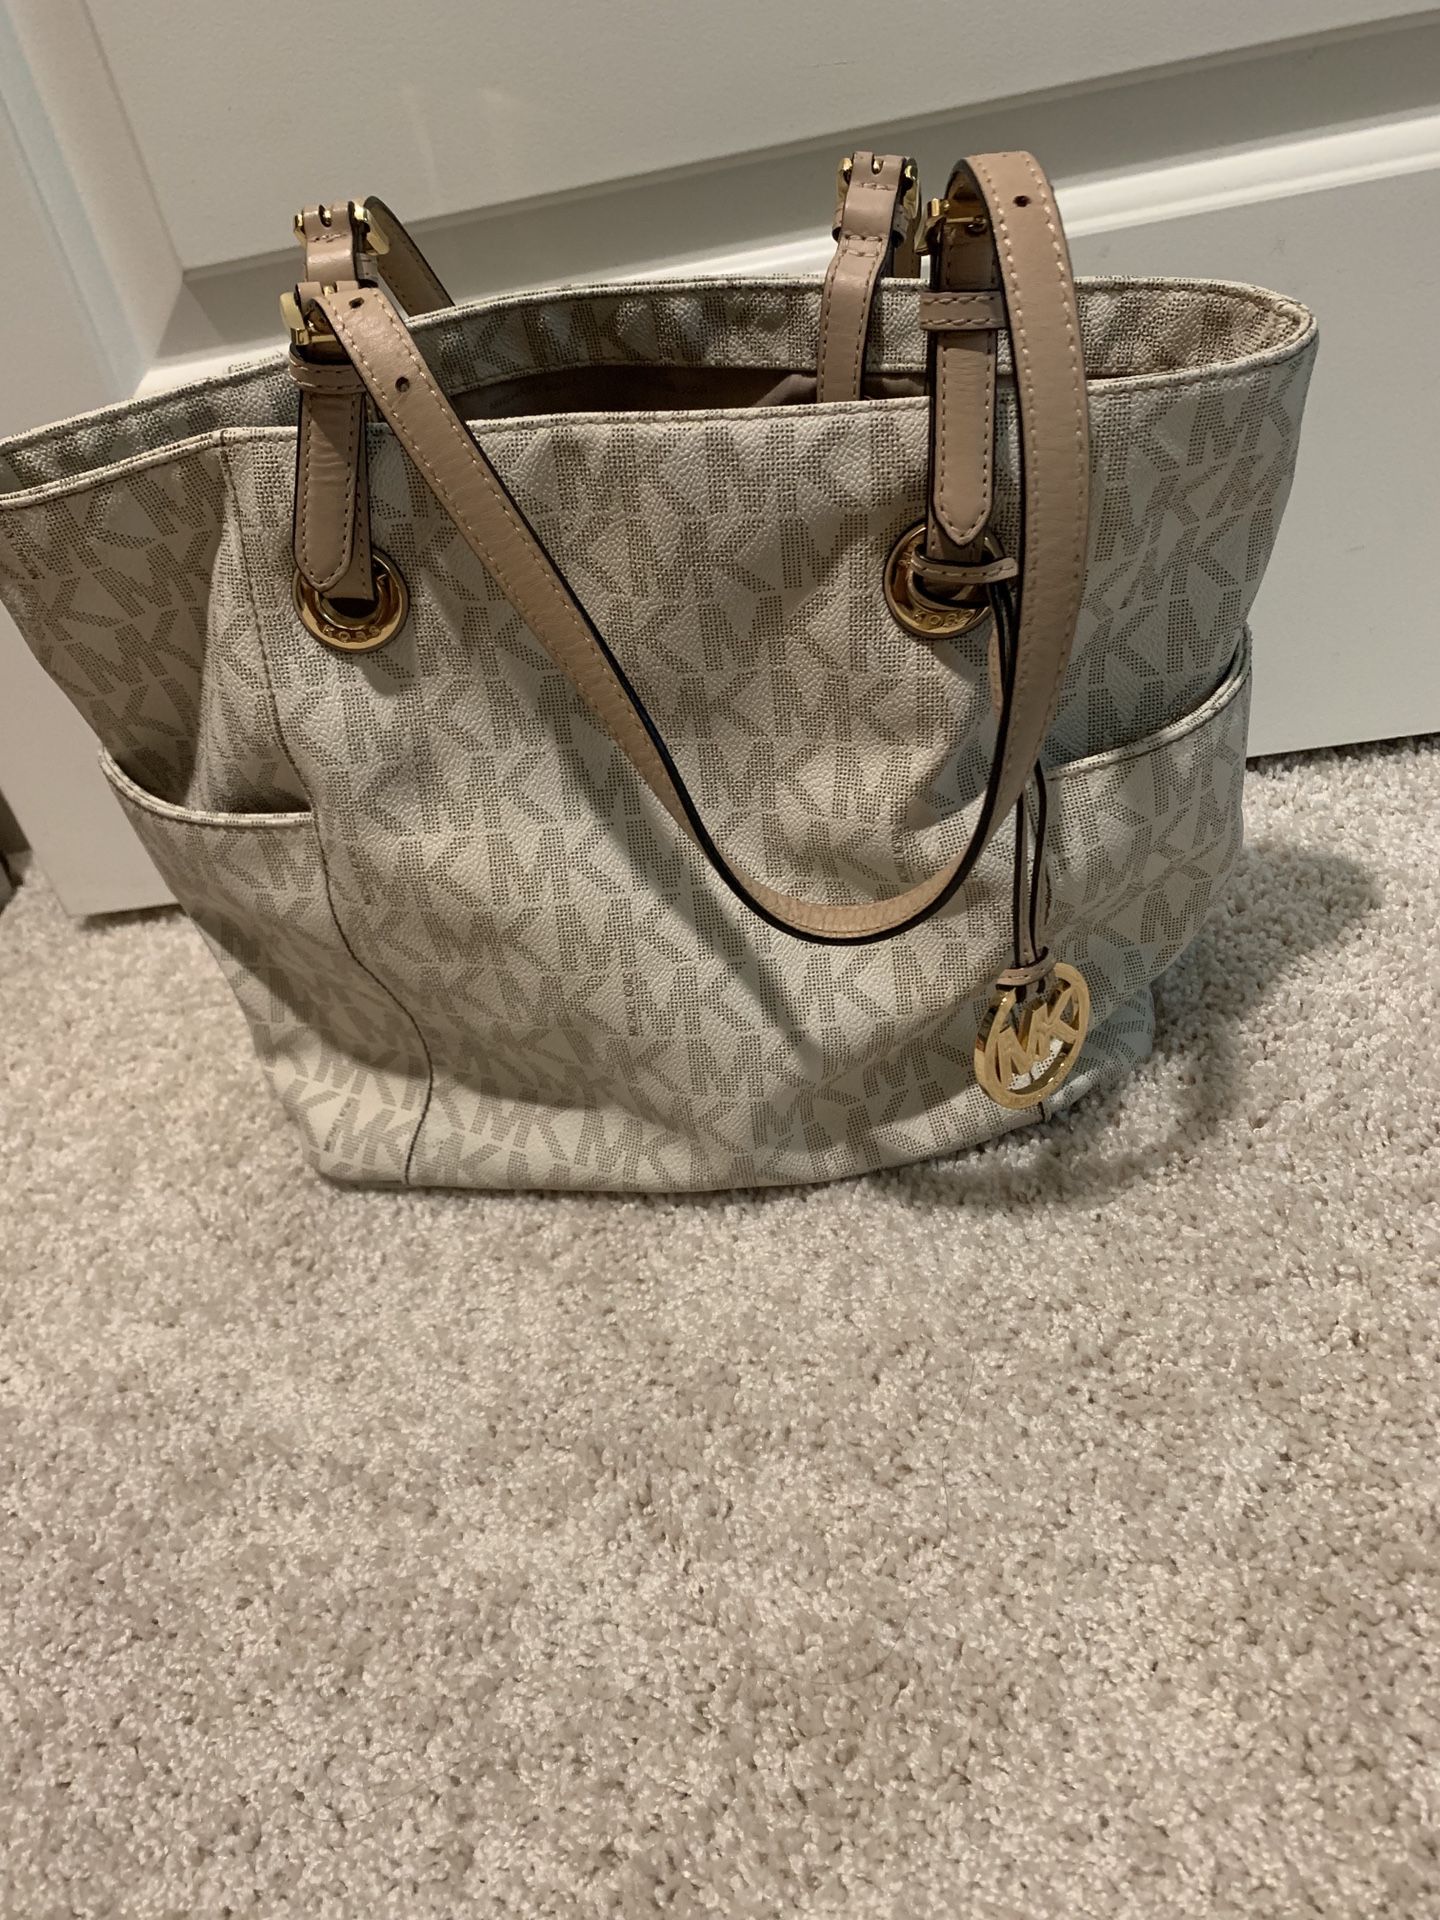 Lightly used authentic MK purse. Need gone ASAP. Make me an offer